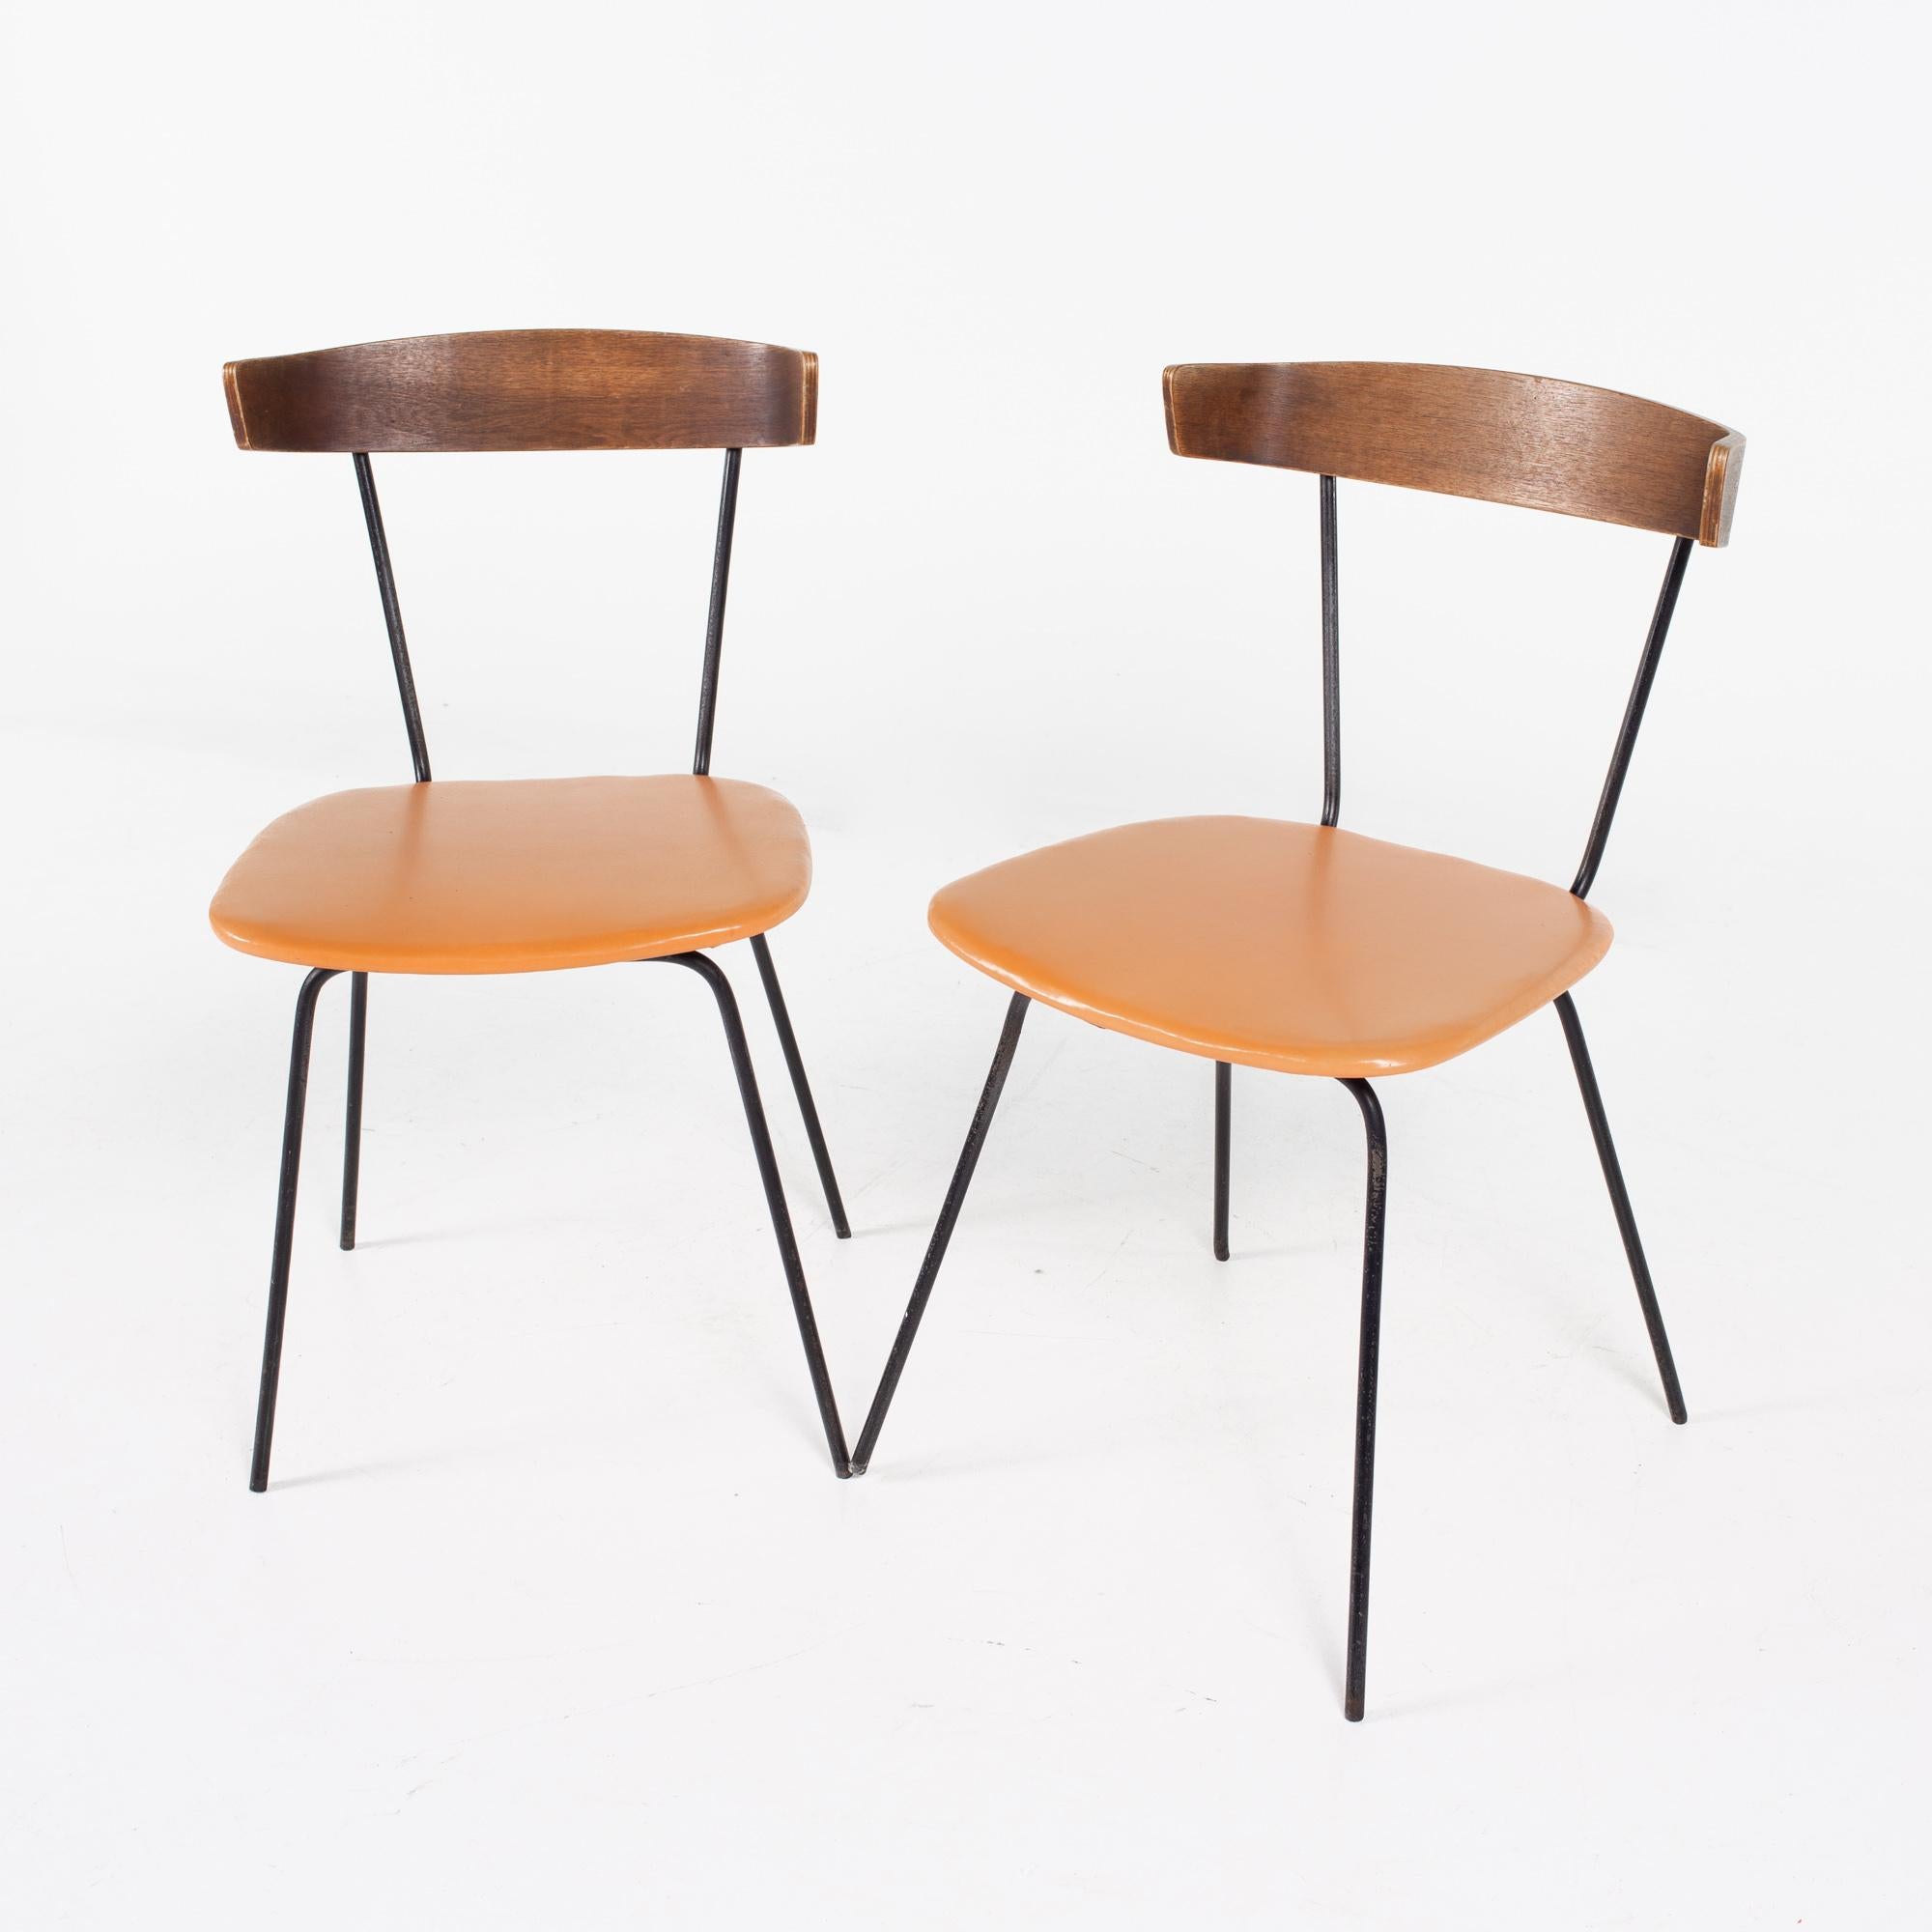 Mid-Century Modern Paul McCobb Style Clifford Pascoe Mcm Walnut Wrought Iron Dining Chairs, Pair For Sale